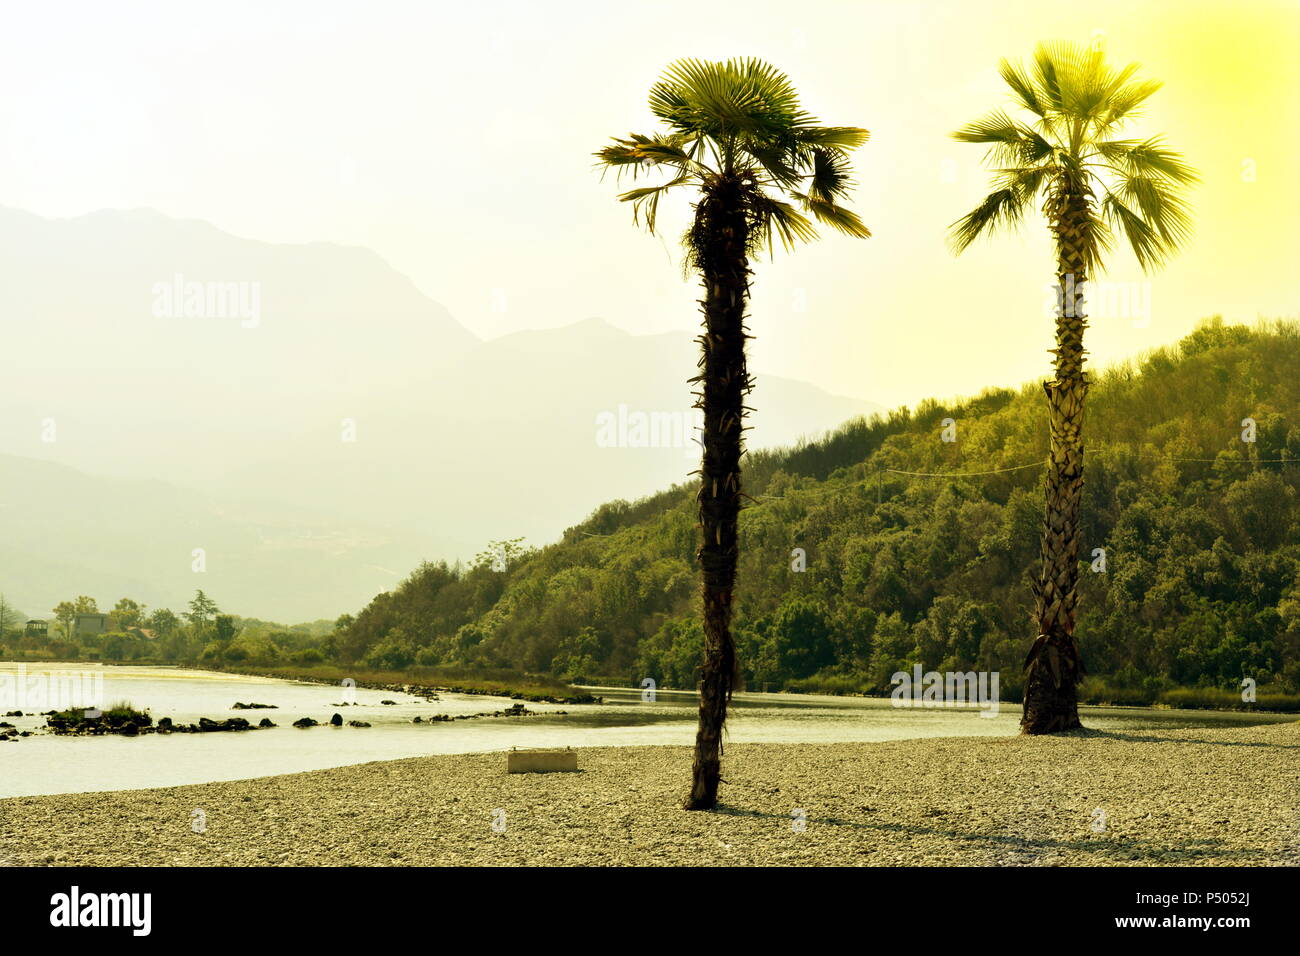 Two palms on the beach with mountains in warm colors. Stock Photo